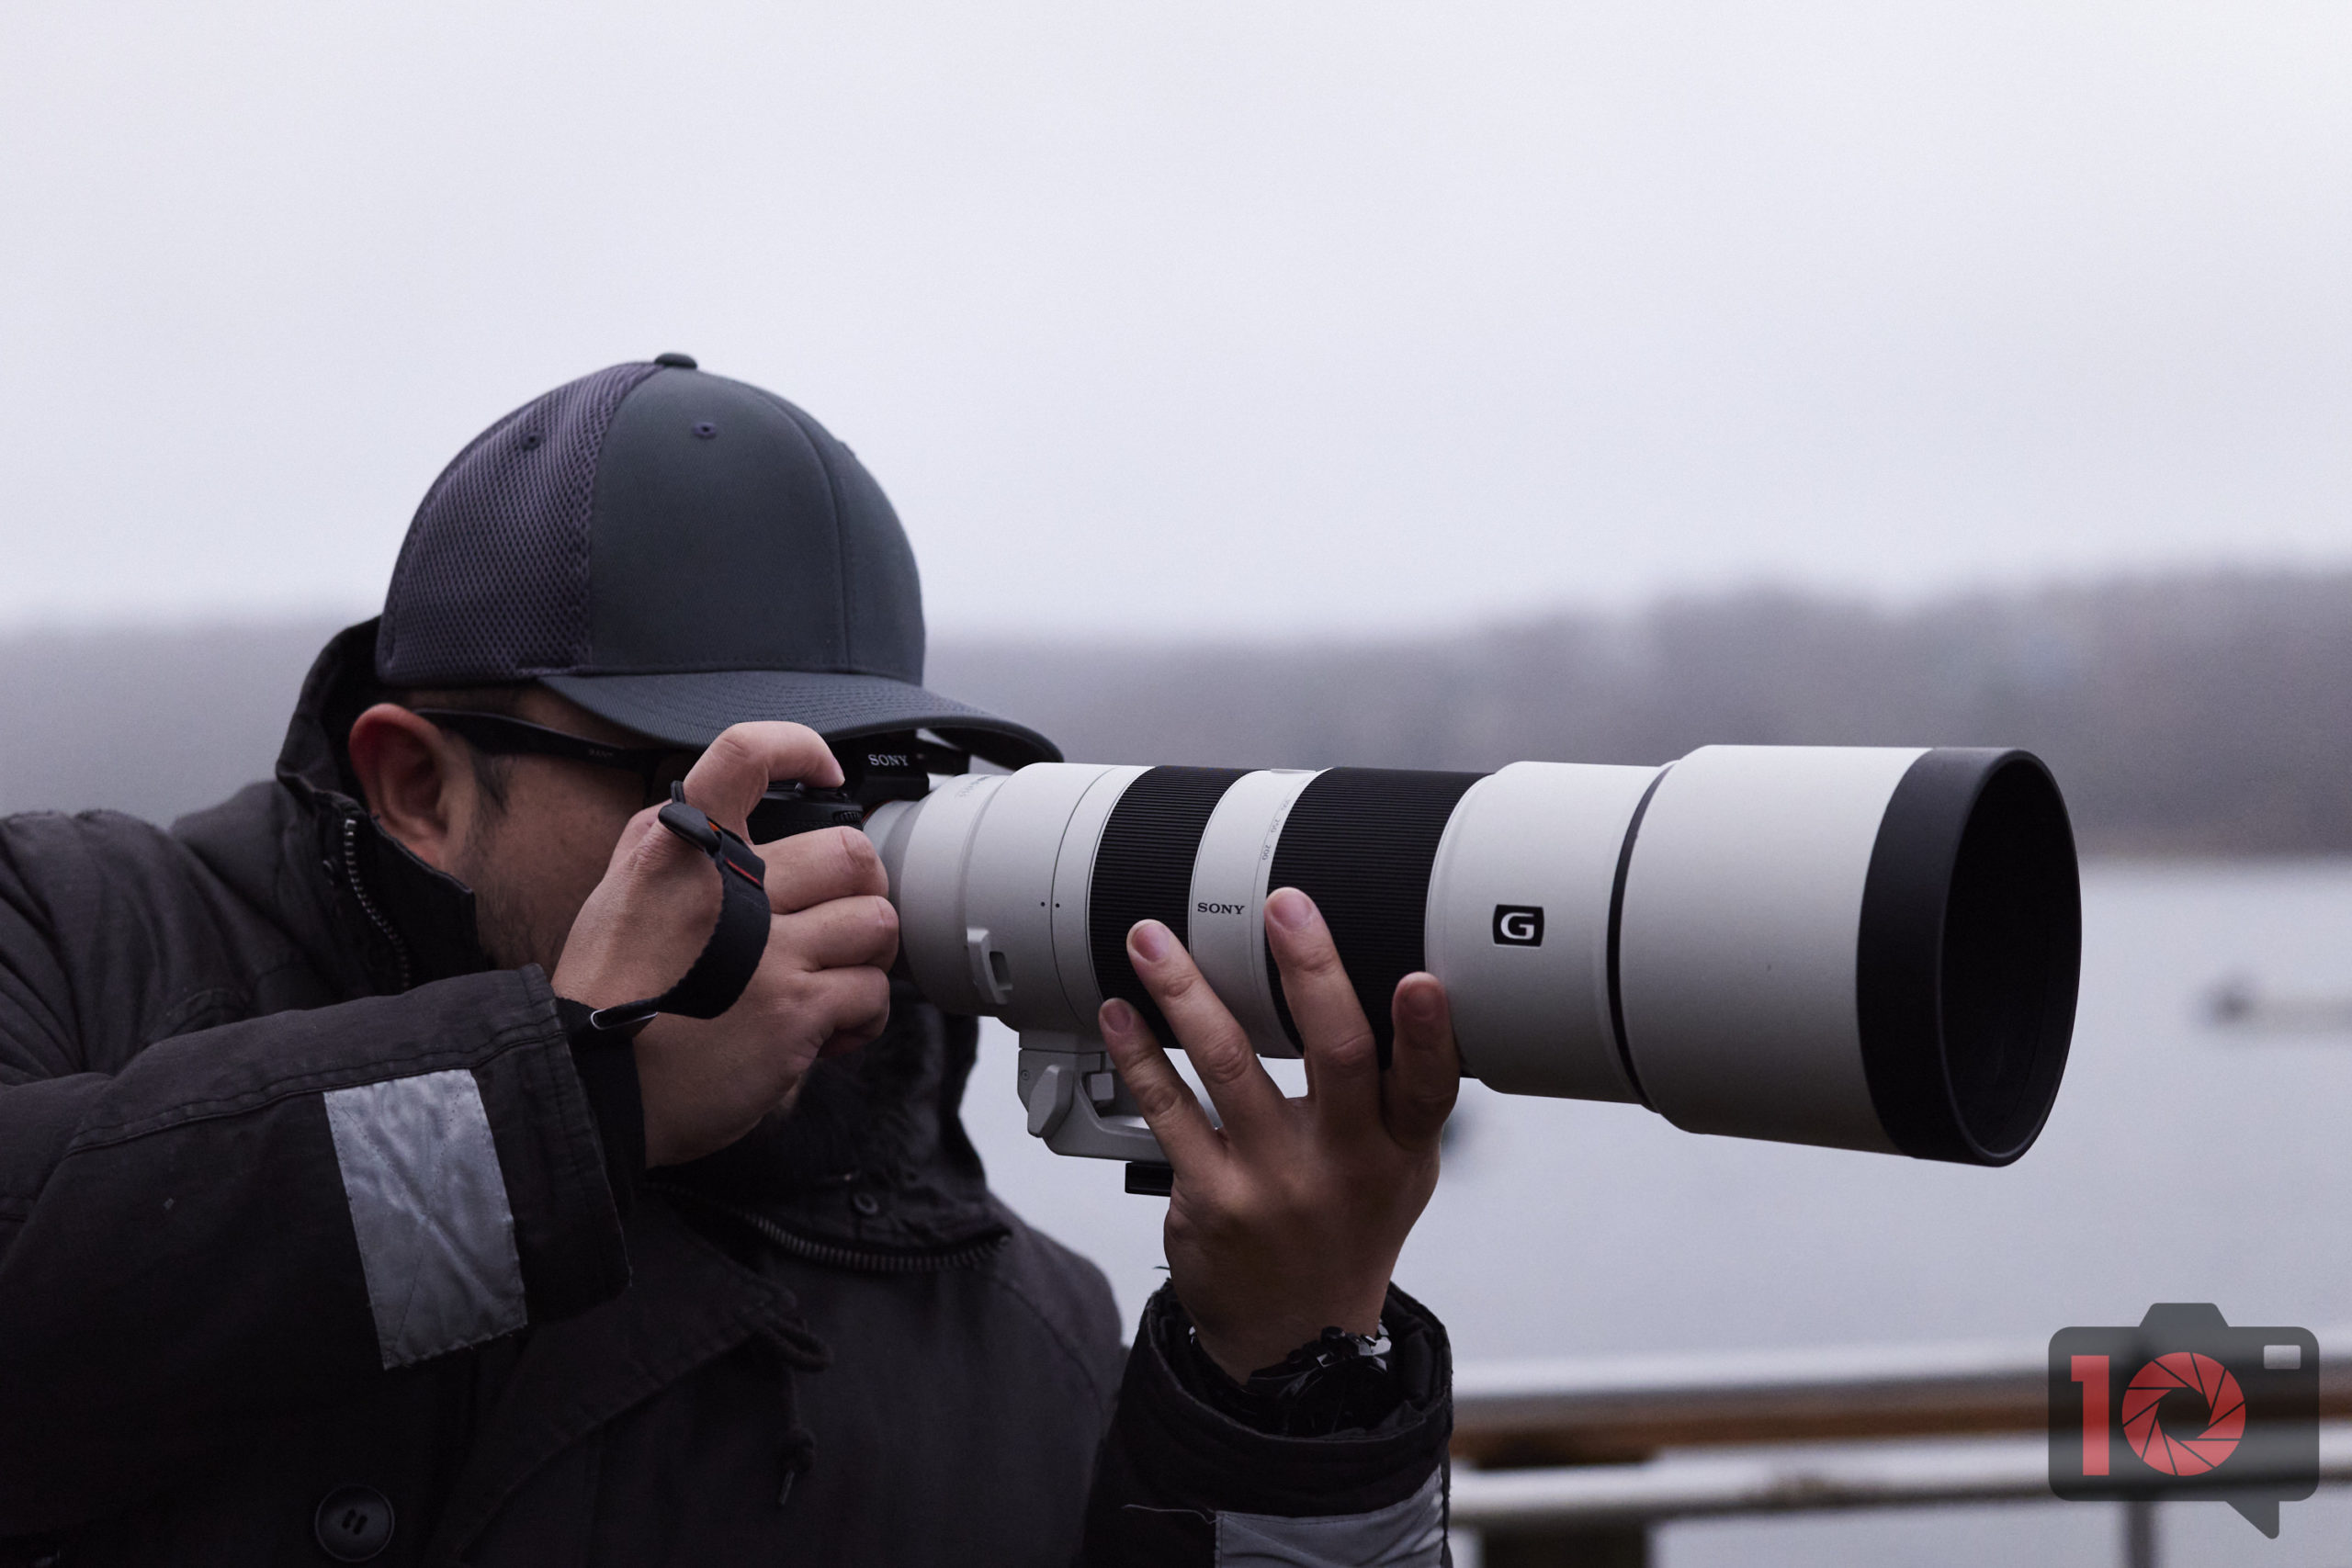 Review: Sony 200-600mm f5.6-6.3 G OSS Super Telephoto (Sony FE)